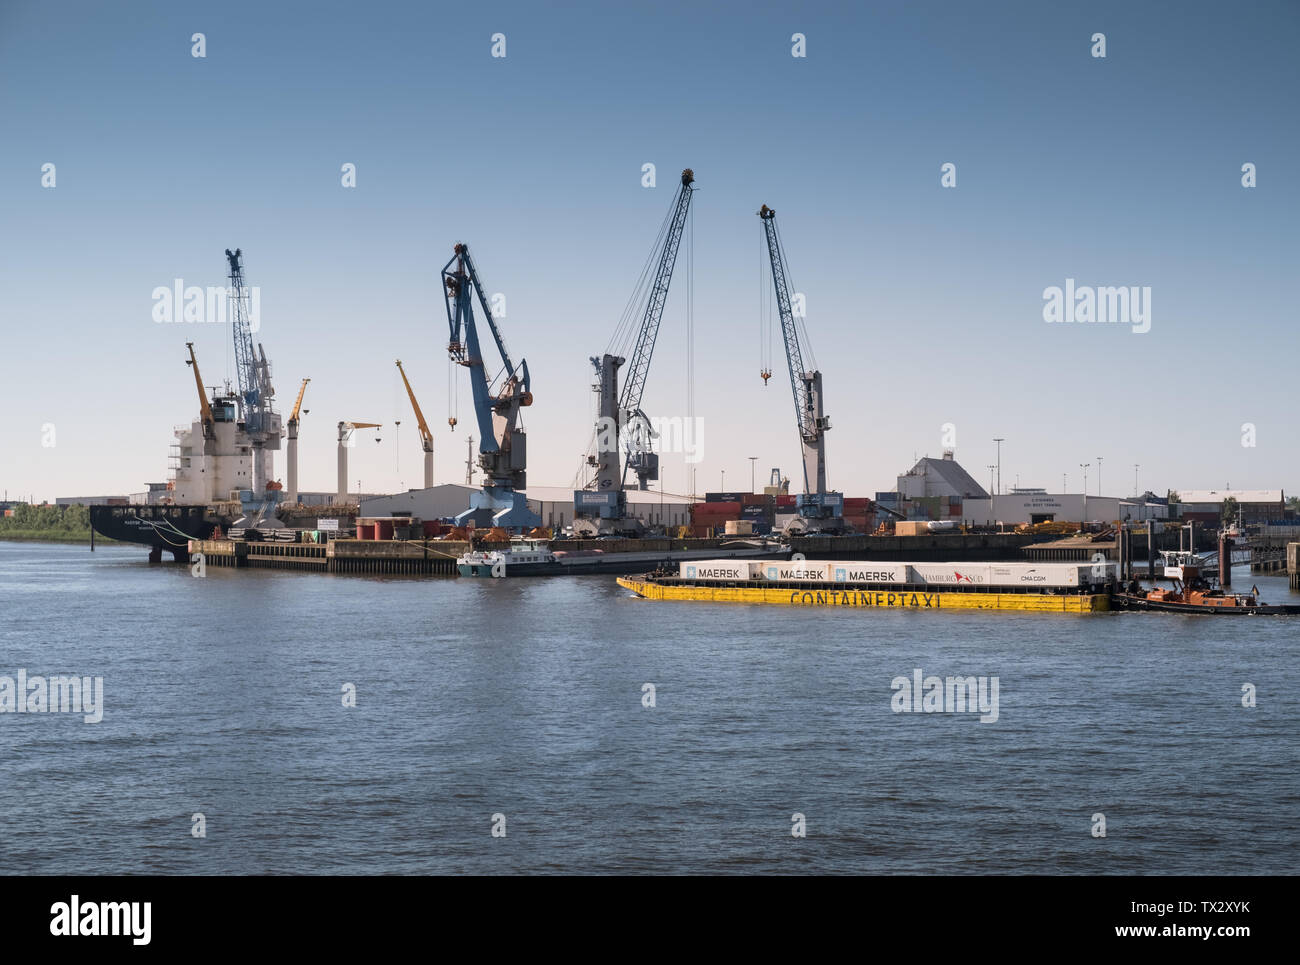 A container taxi transports large containers along the Elbe river, Hamburg, Germany. Stock Photo